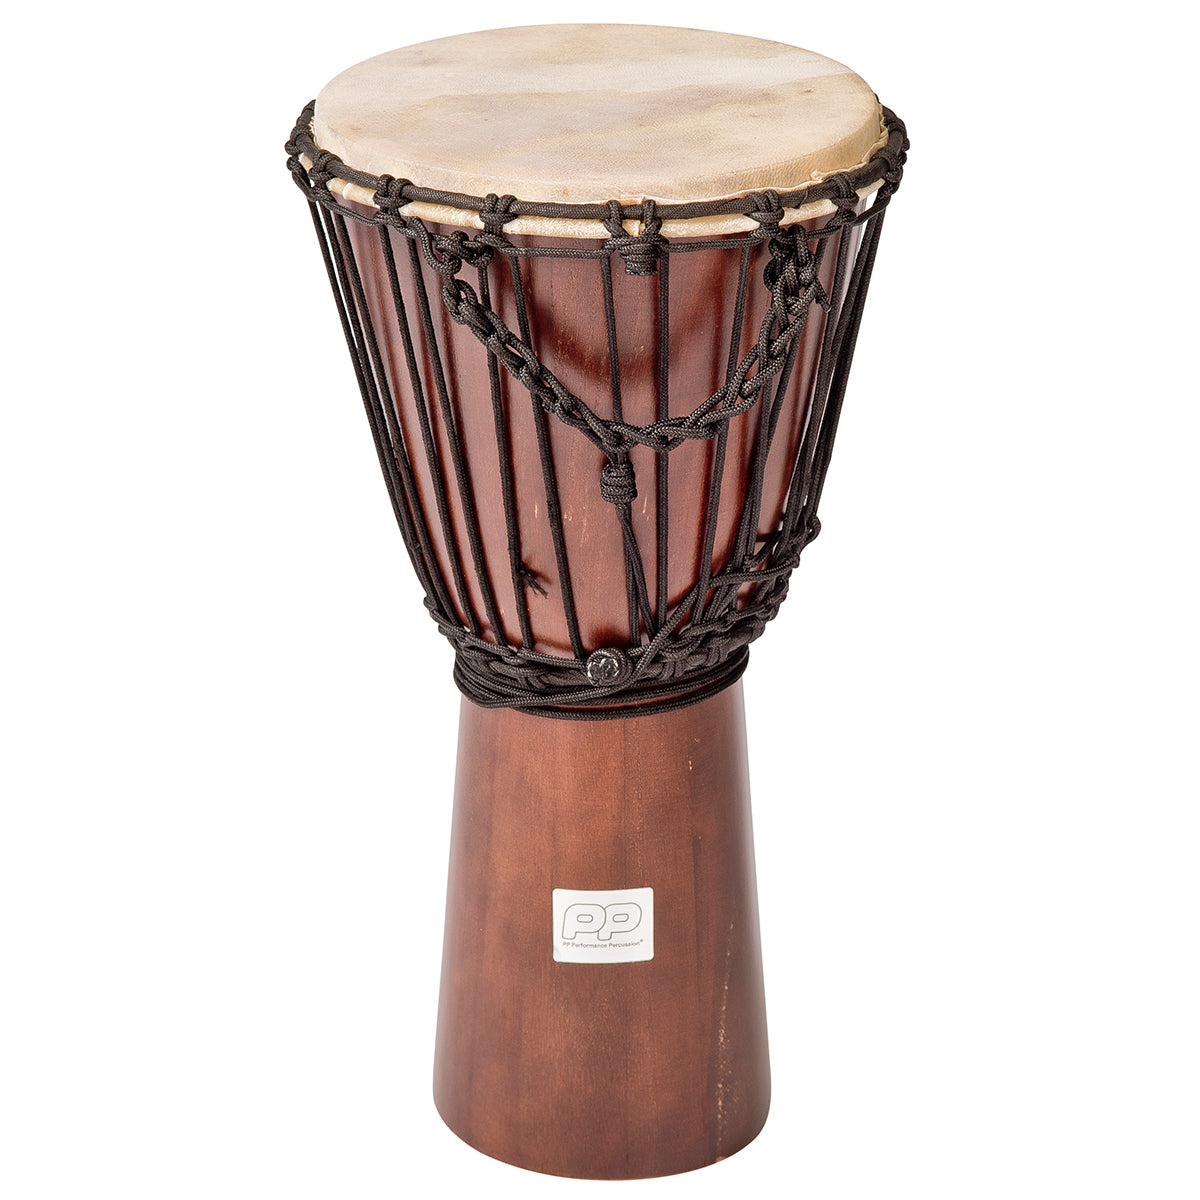 PP World African Djembe - Large